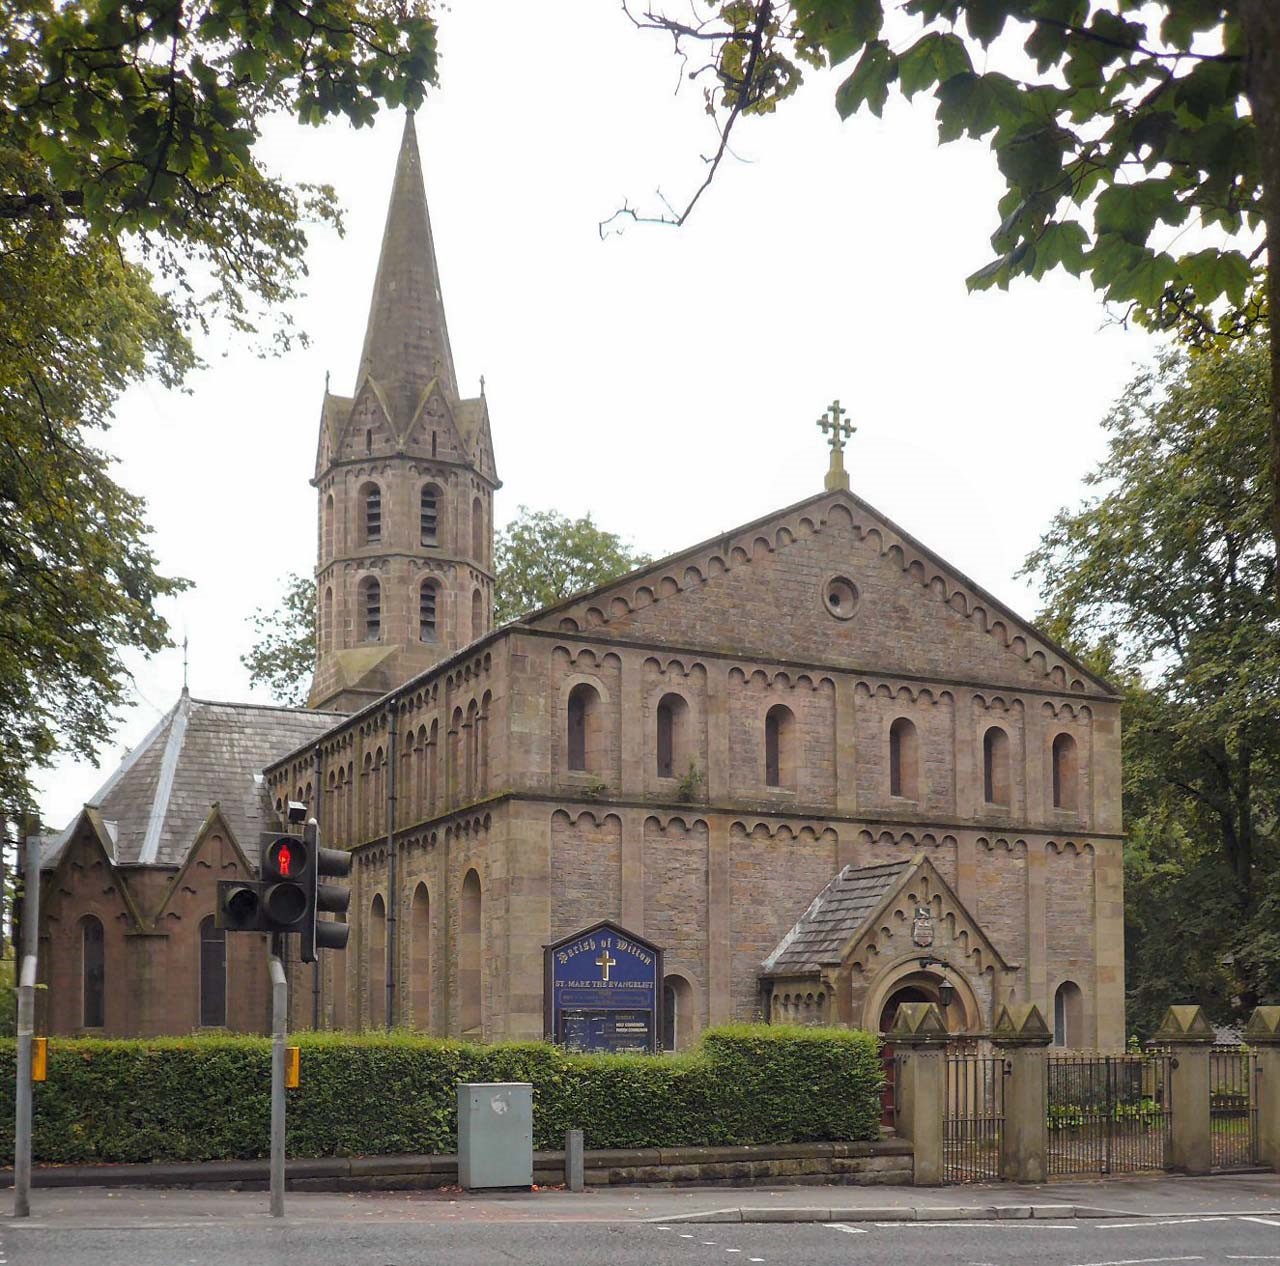 The Church of St Mark the Evangelist, Witton